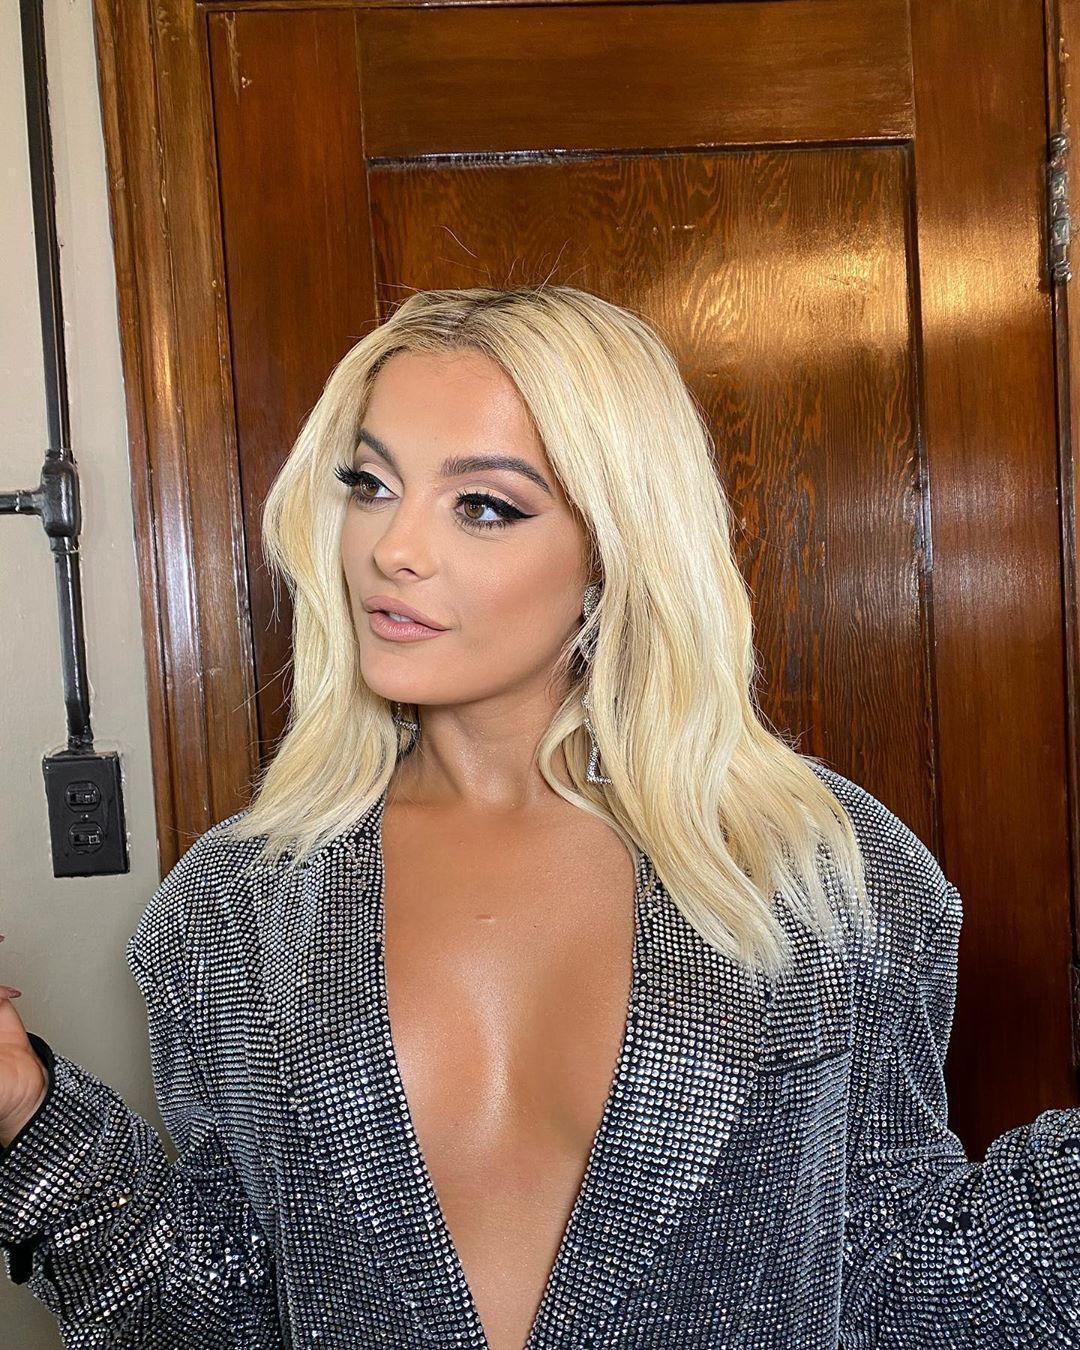 75+ Hot Pictures Of Bebe Rexha Will Melt You Like An Ice Cube | Best Of Comic Books